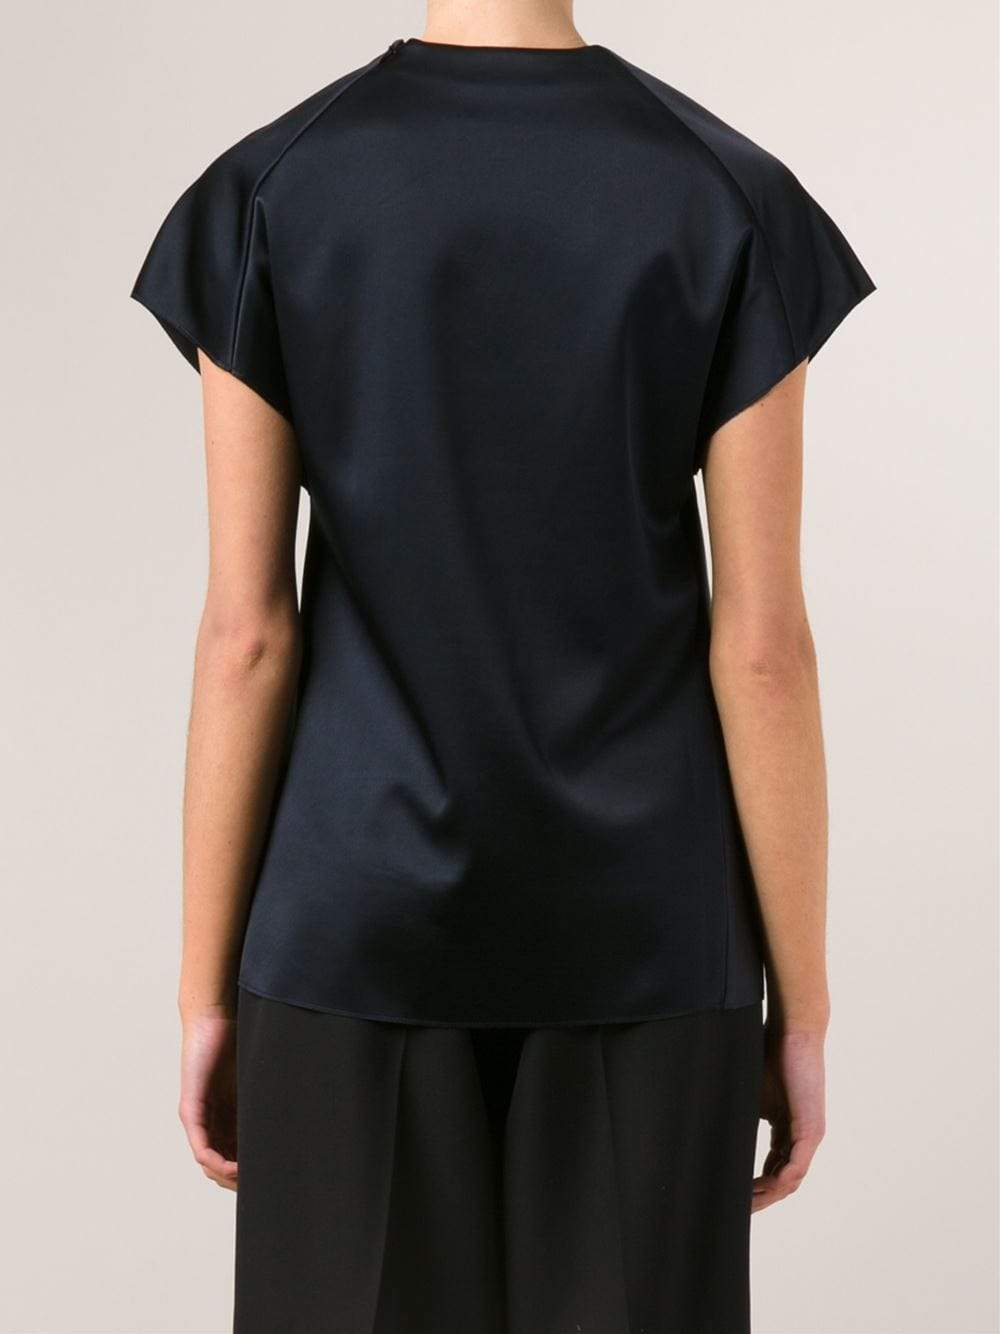 Crossover Shirt With Pin CLOTHINGSKIRTMISC 3.1 PHILLIP LIM   